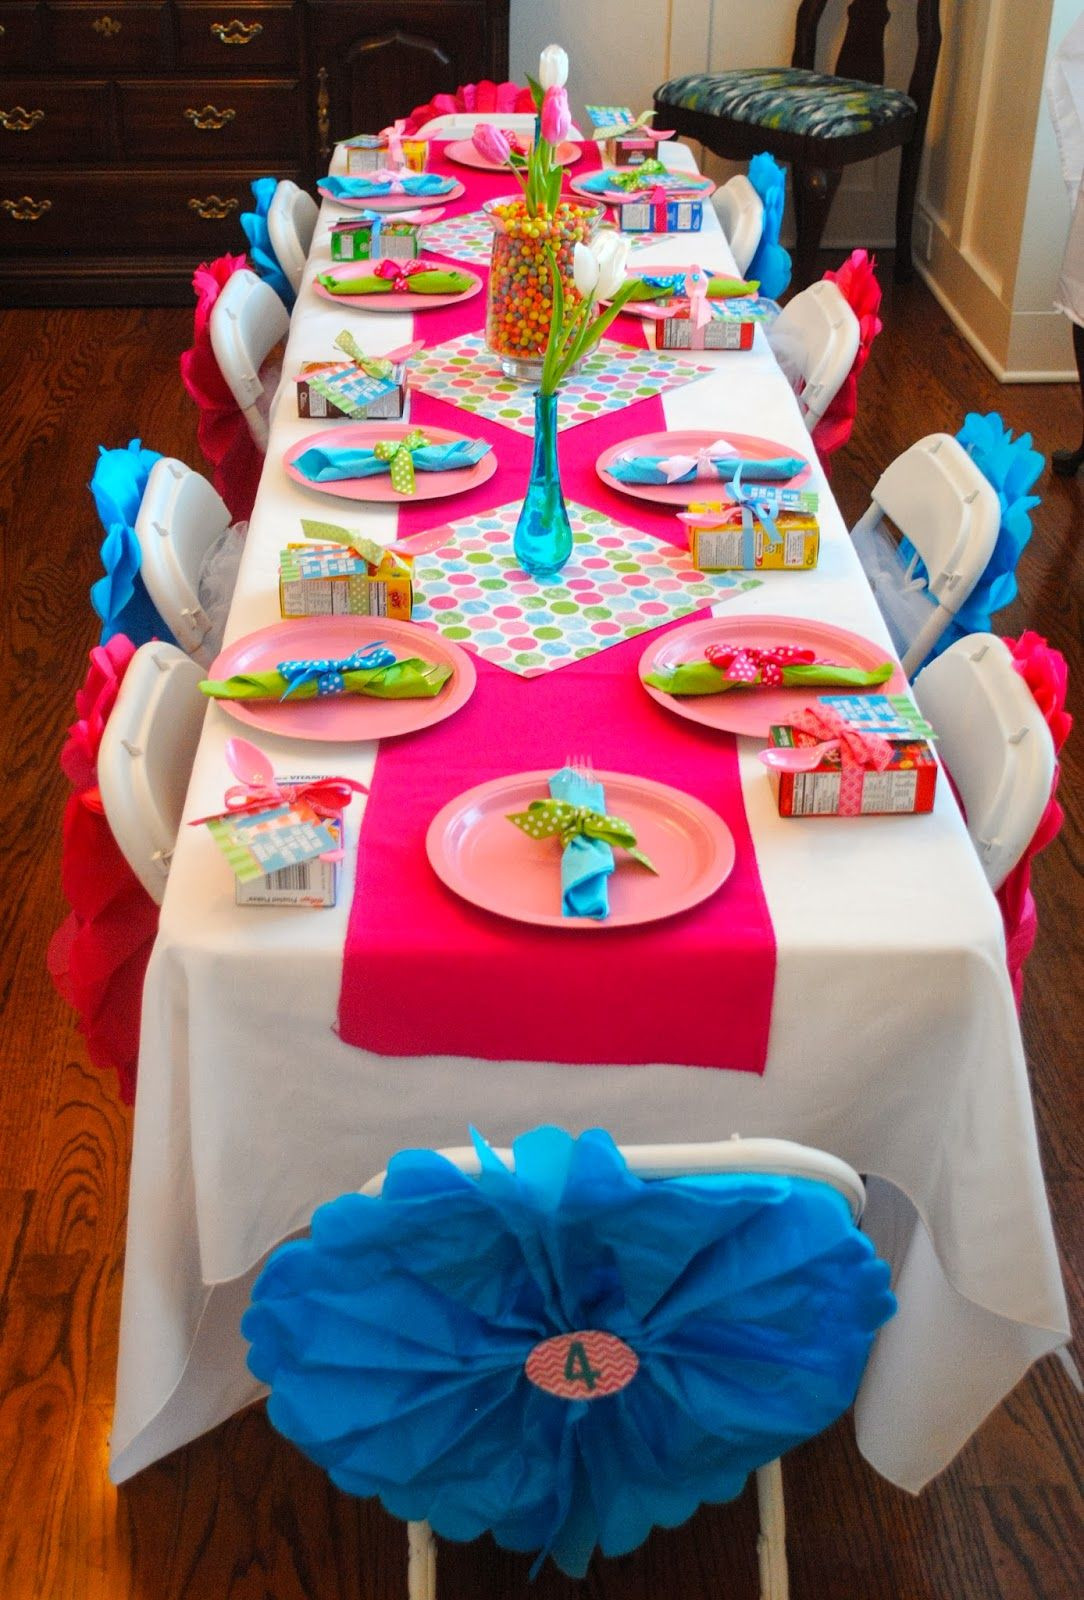 4 Year Old Girl Birthday Party Ideas
 Jackie Fo Pajamas and Pancakes A 4 year old s fabulous